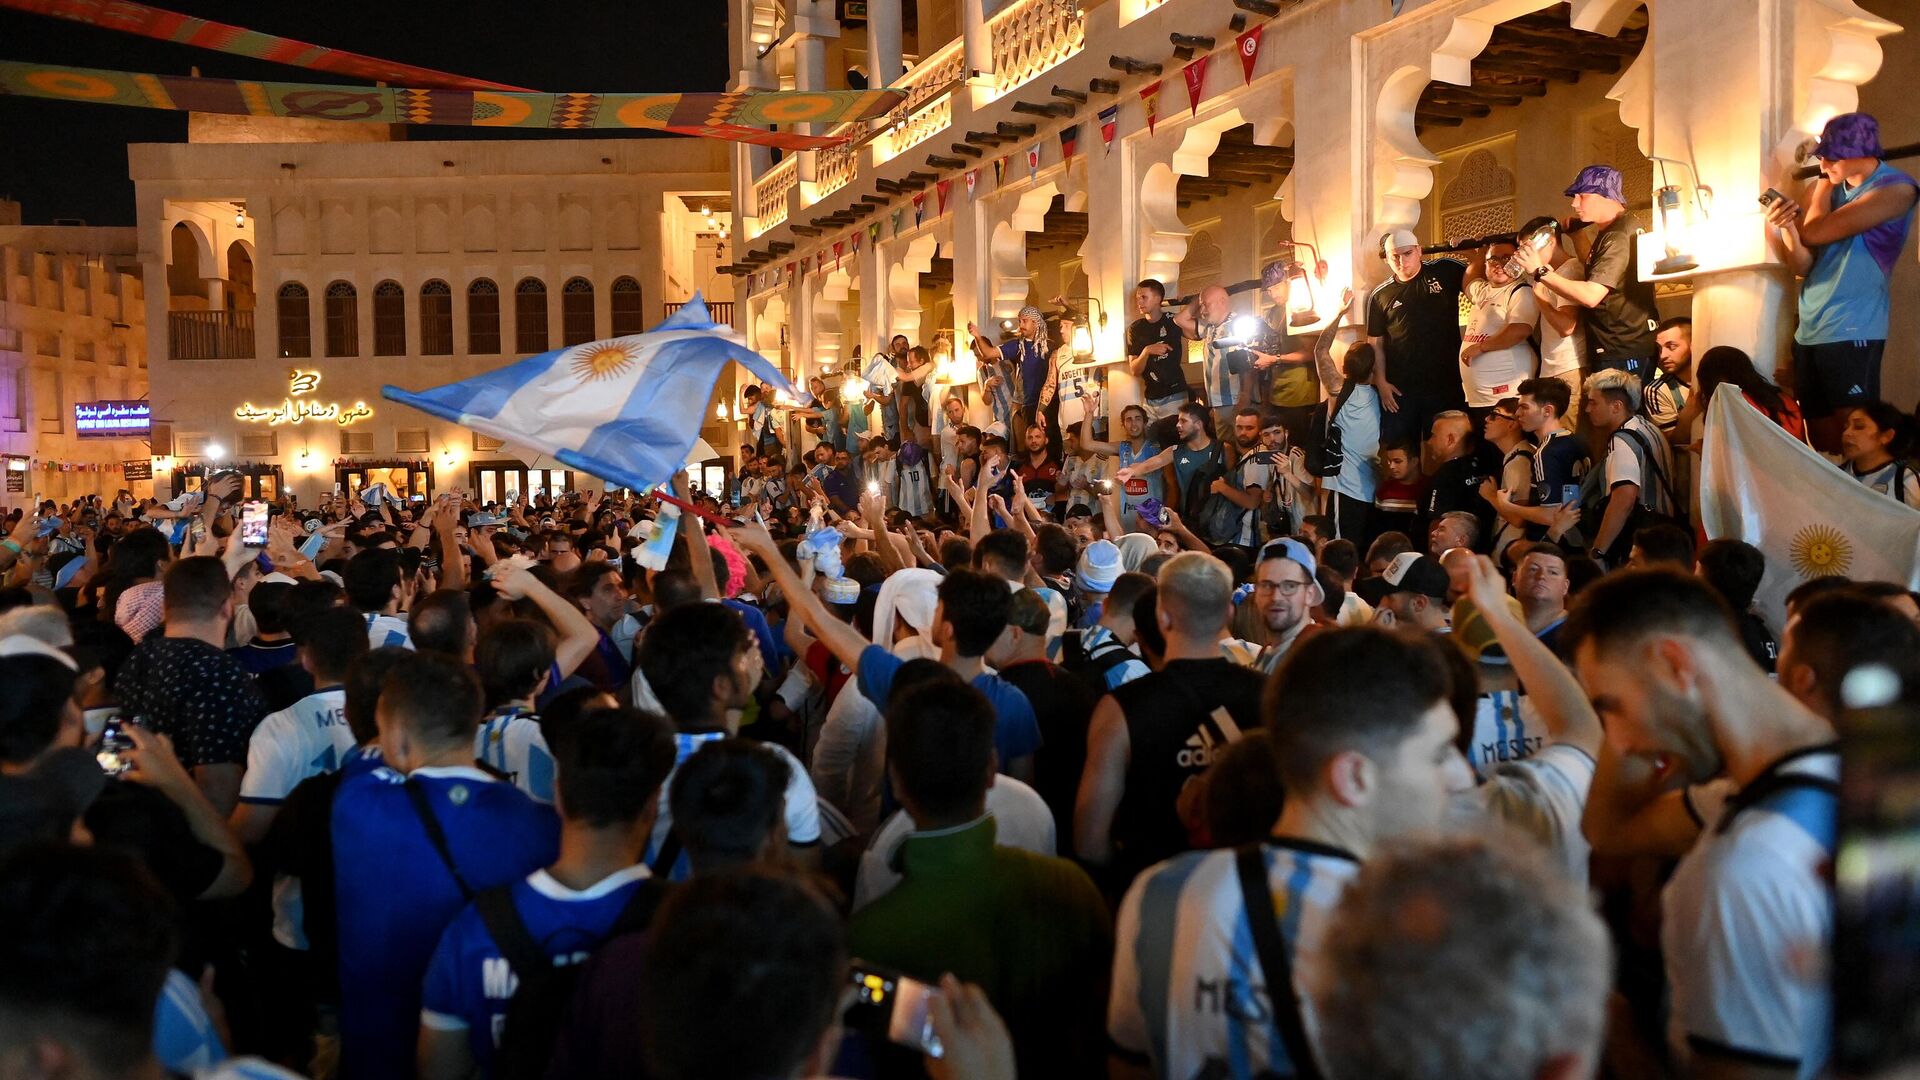 Argentinian fans gather at the Souq Waqif in Doha on November 29, 2022 during the Qatar 2022 World Cup football tournament. (Photo by FRANCK FIFE / AFP) - Sputnik International, 1920, 16.12.2022